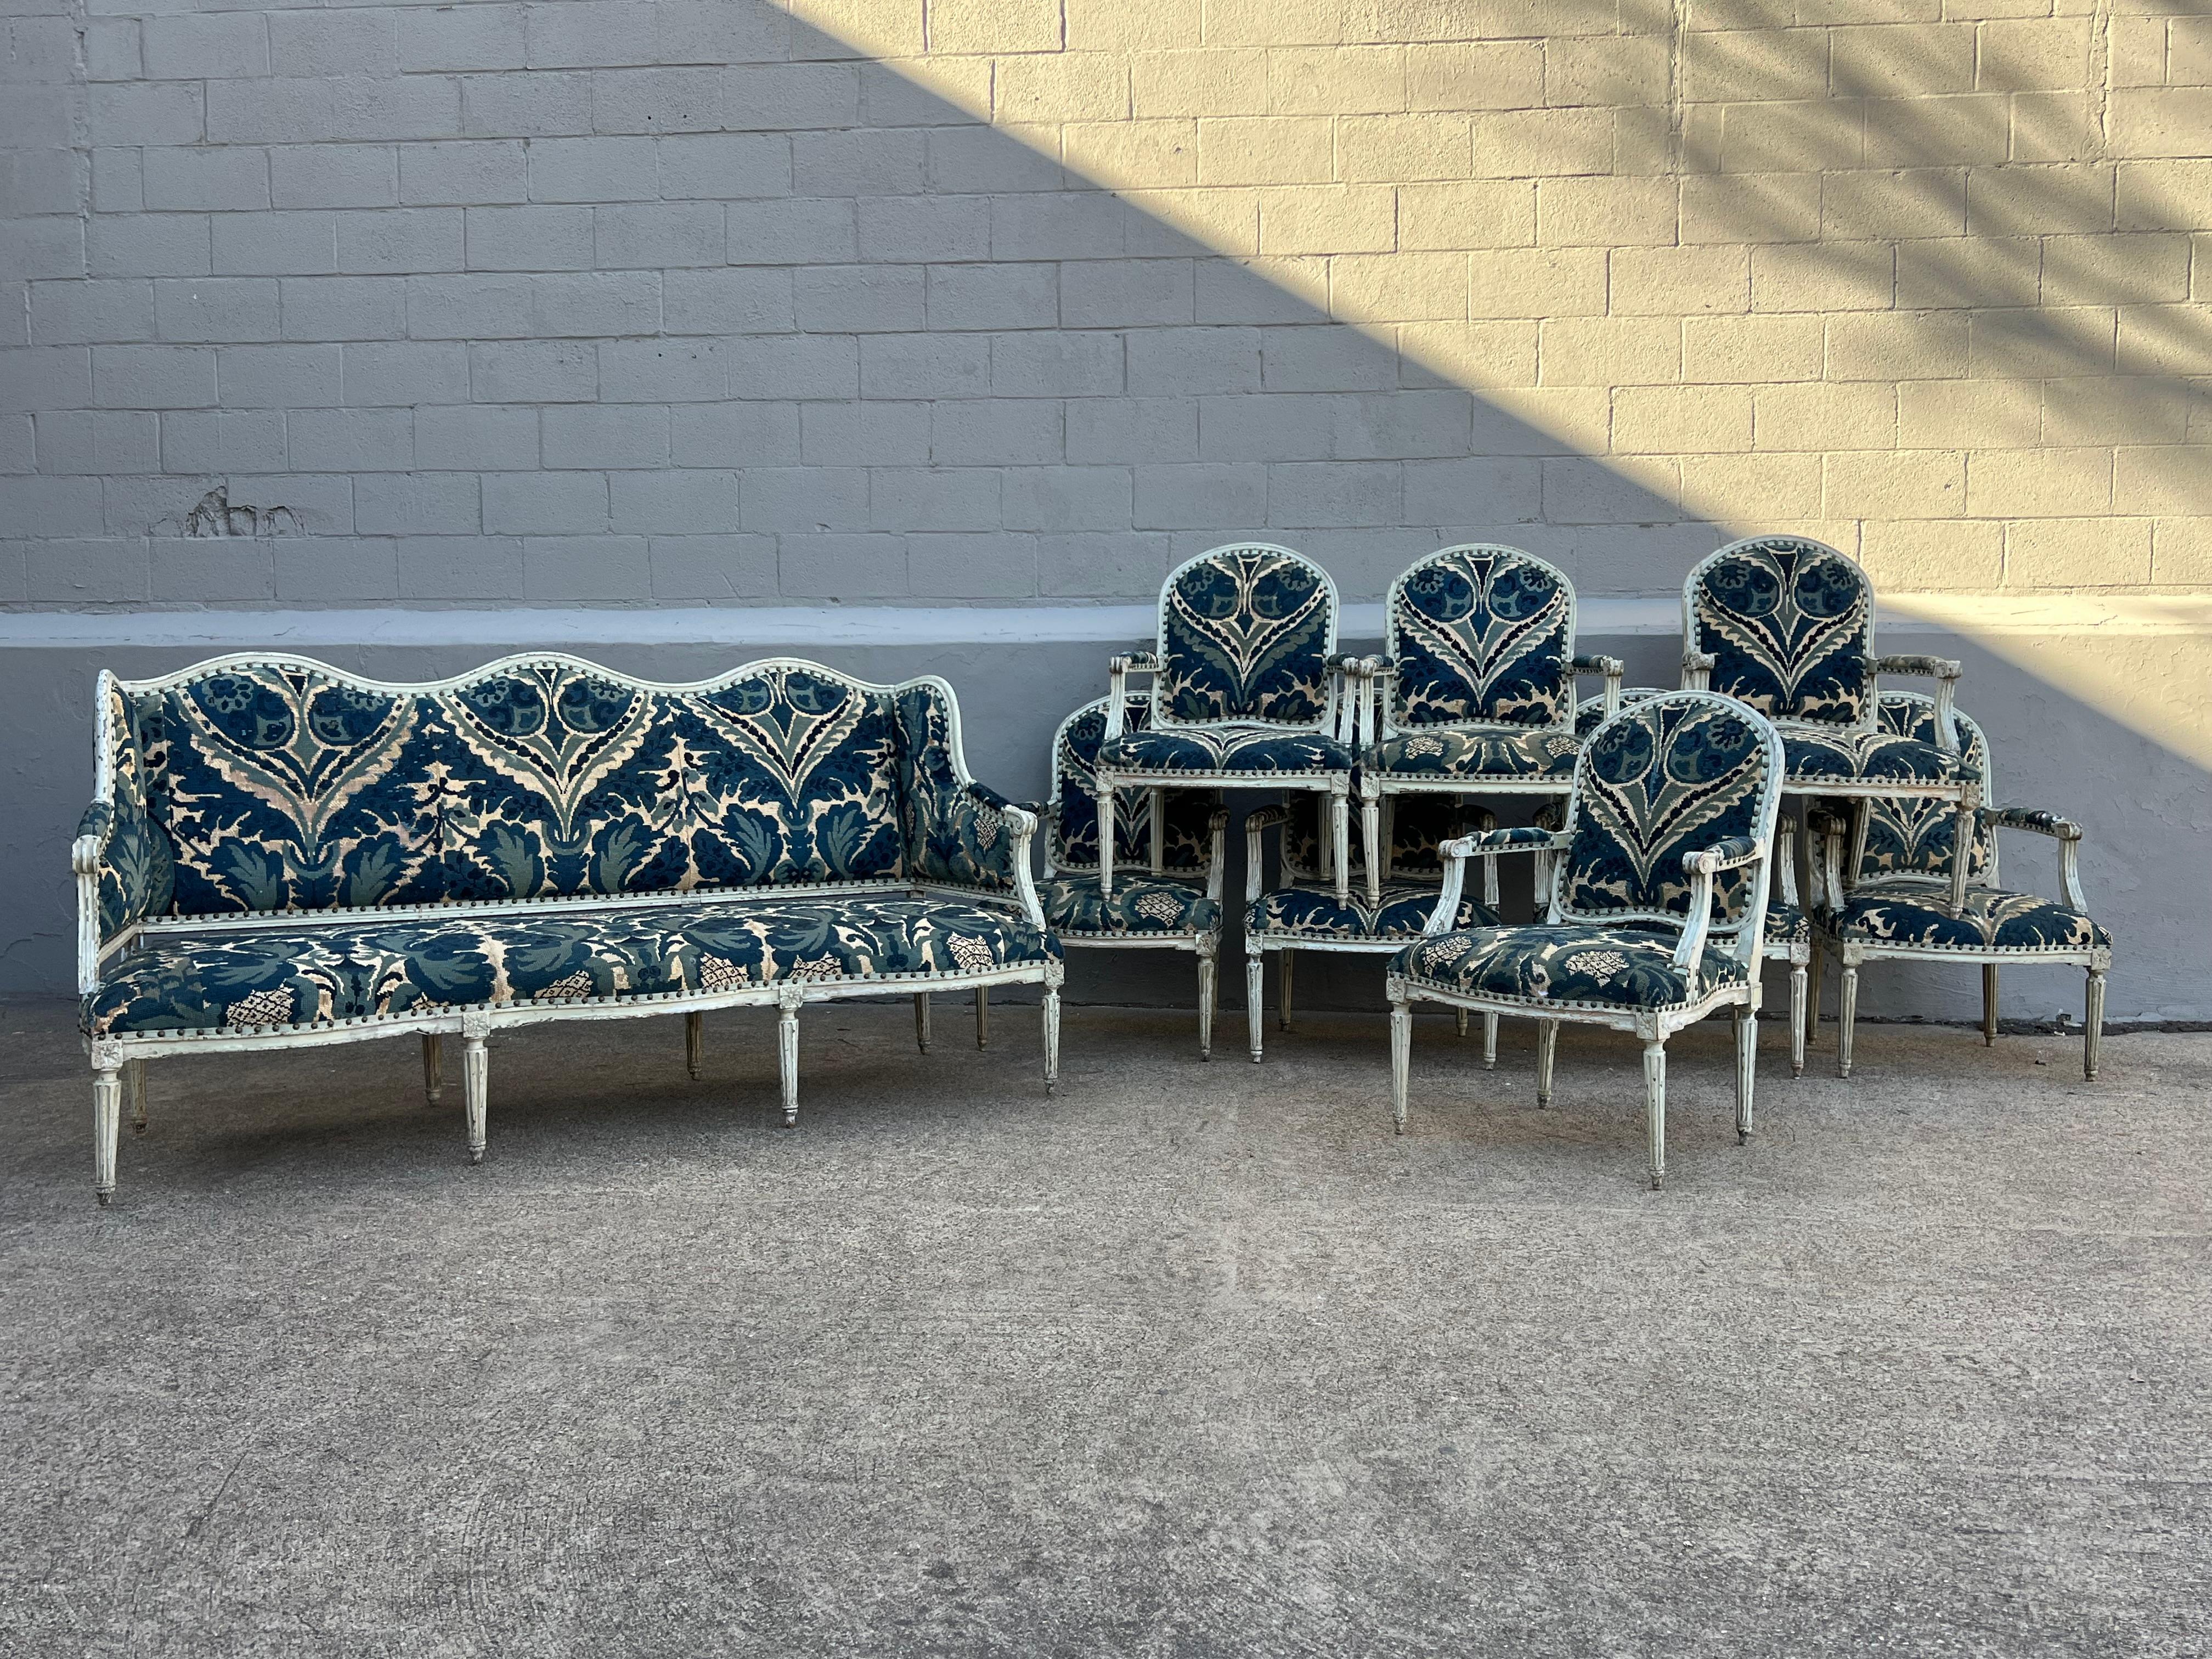 French nine piece Louis XVI period salon suite consisting of 8 armchairs - fauteuils and a sofa - canape with wings. This set is from the late 18th century and has an old painted finish with old paint showing through in layers. It is upholstered in